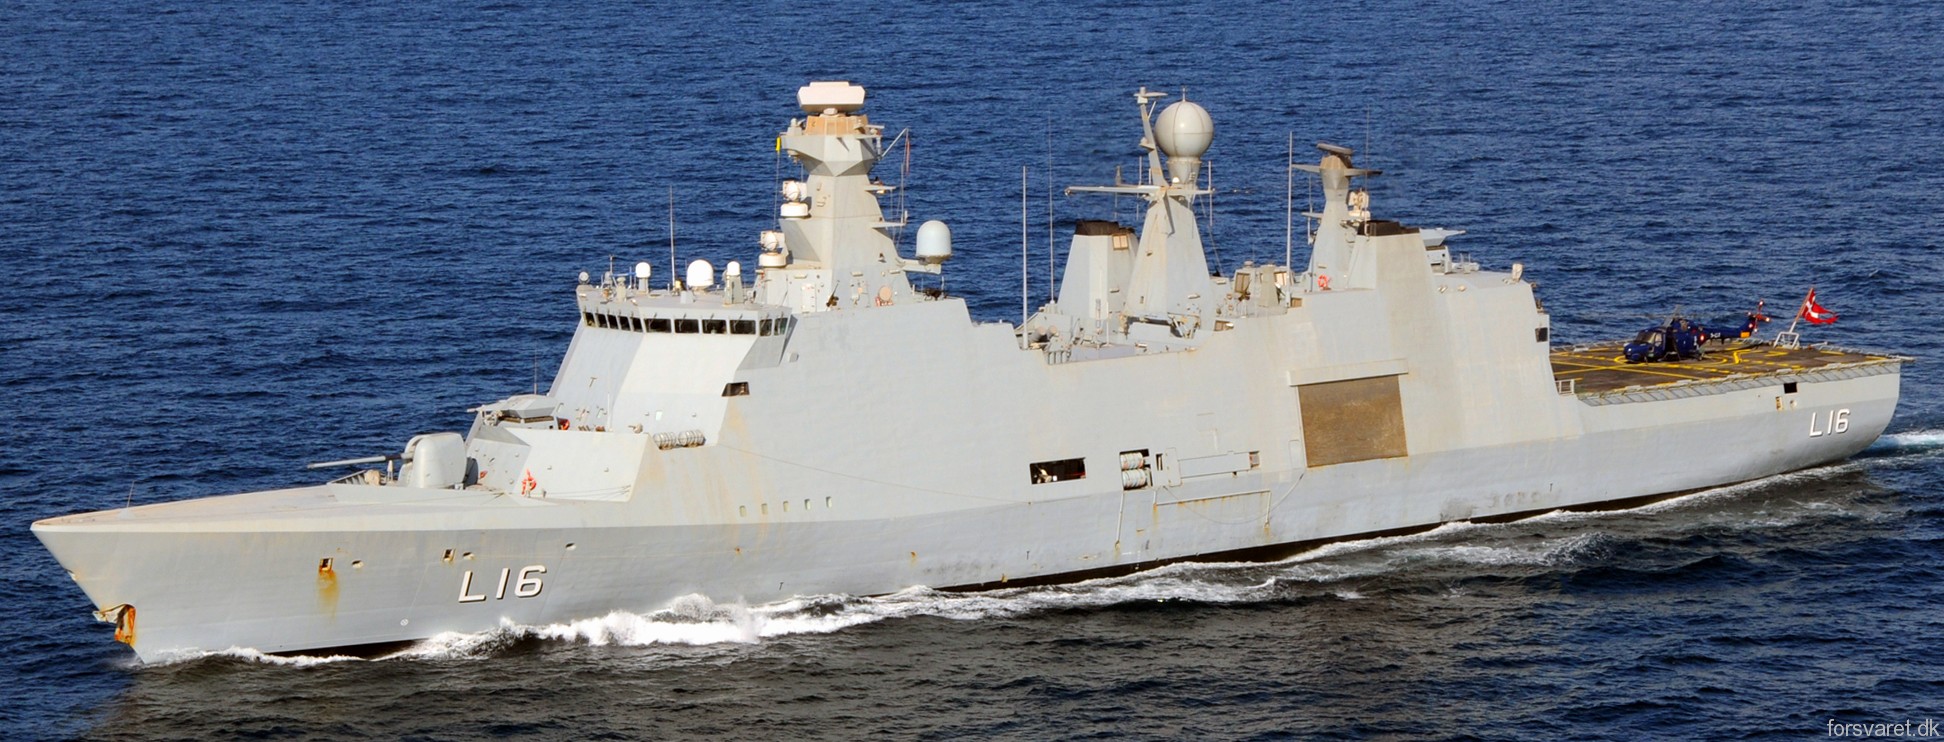 l-16 hdms absalon command support ship frigate royal danish navy 69